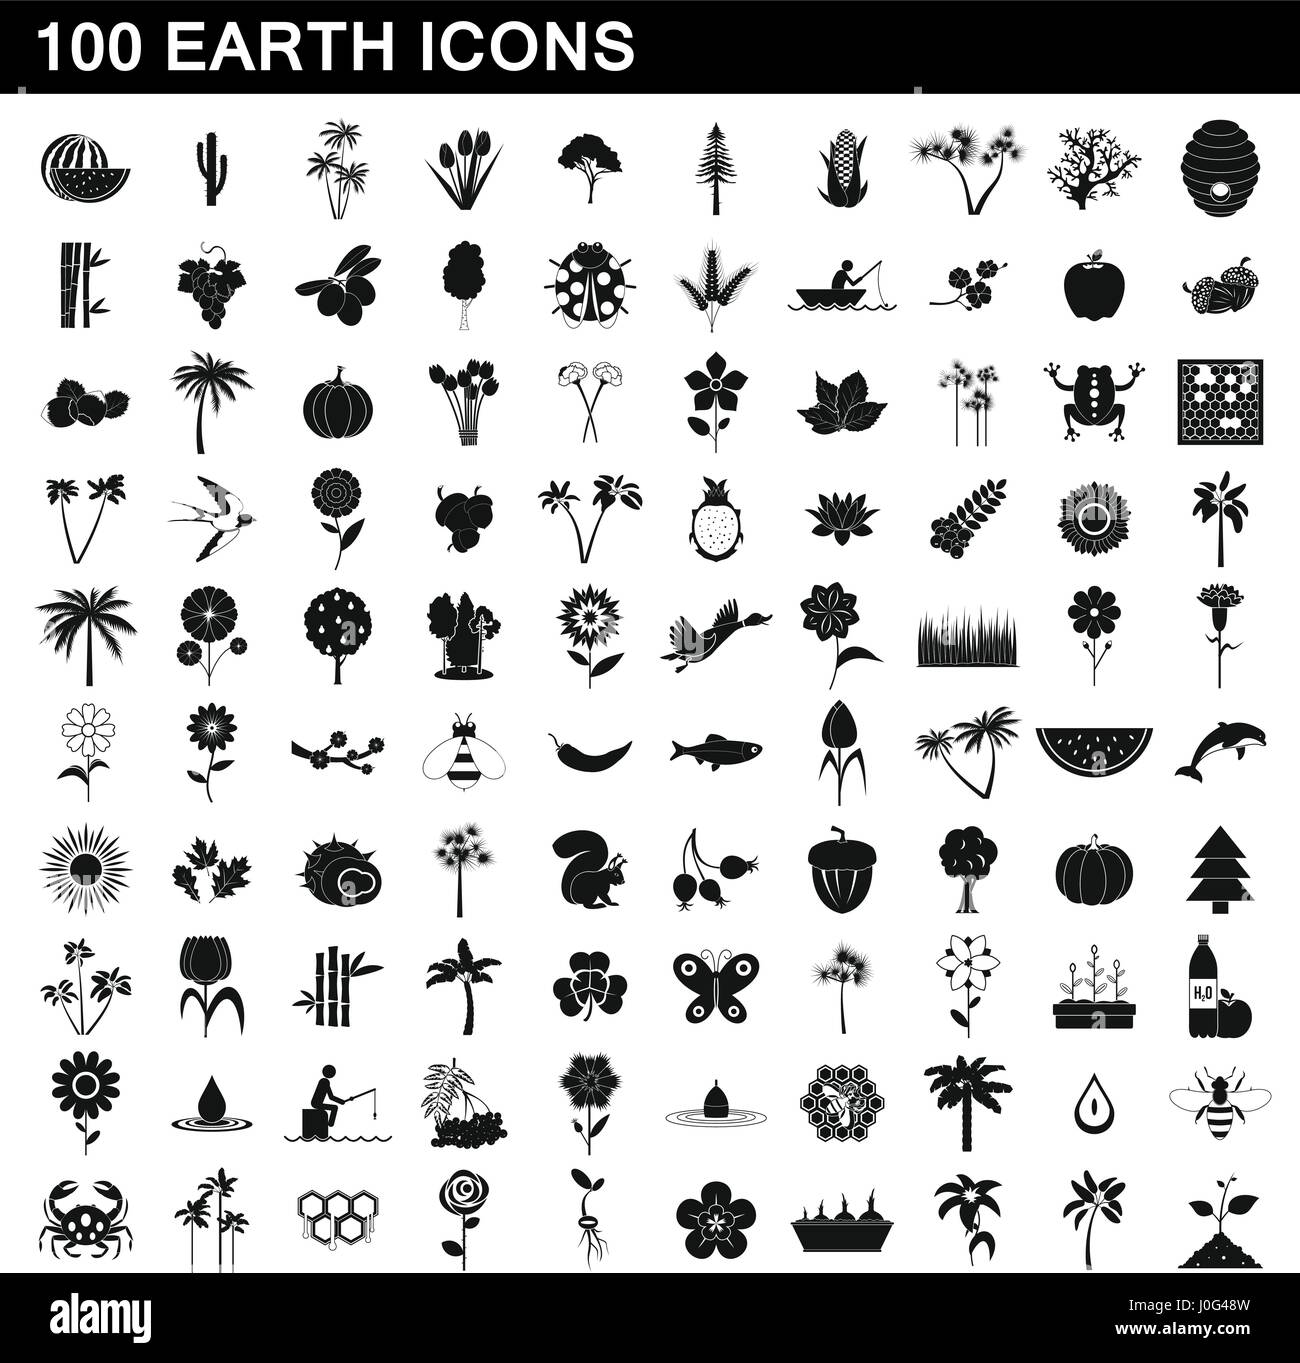 100 earth icons set, simple style Stock Vector